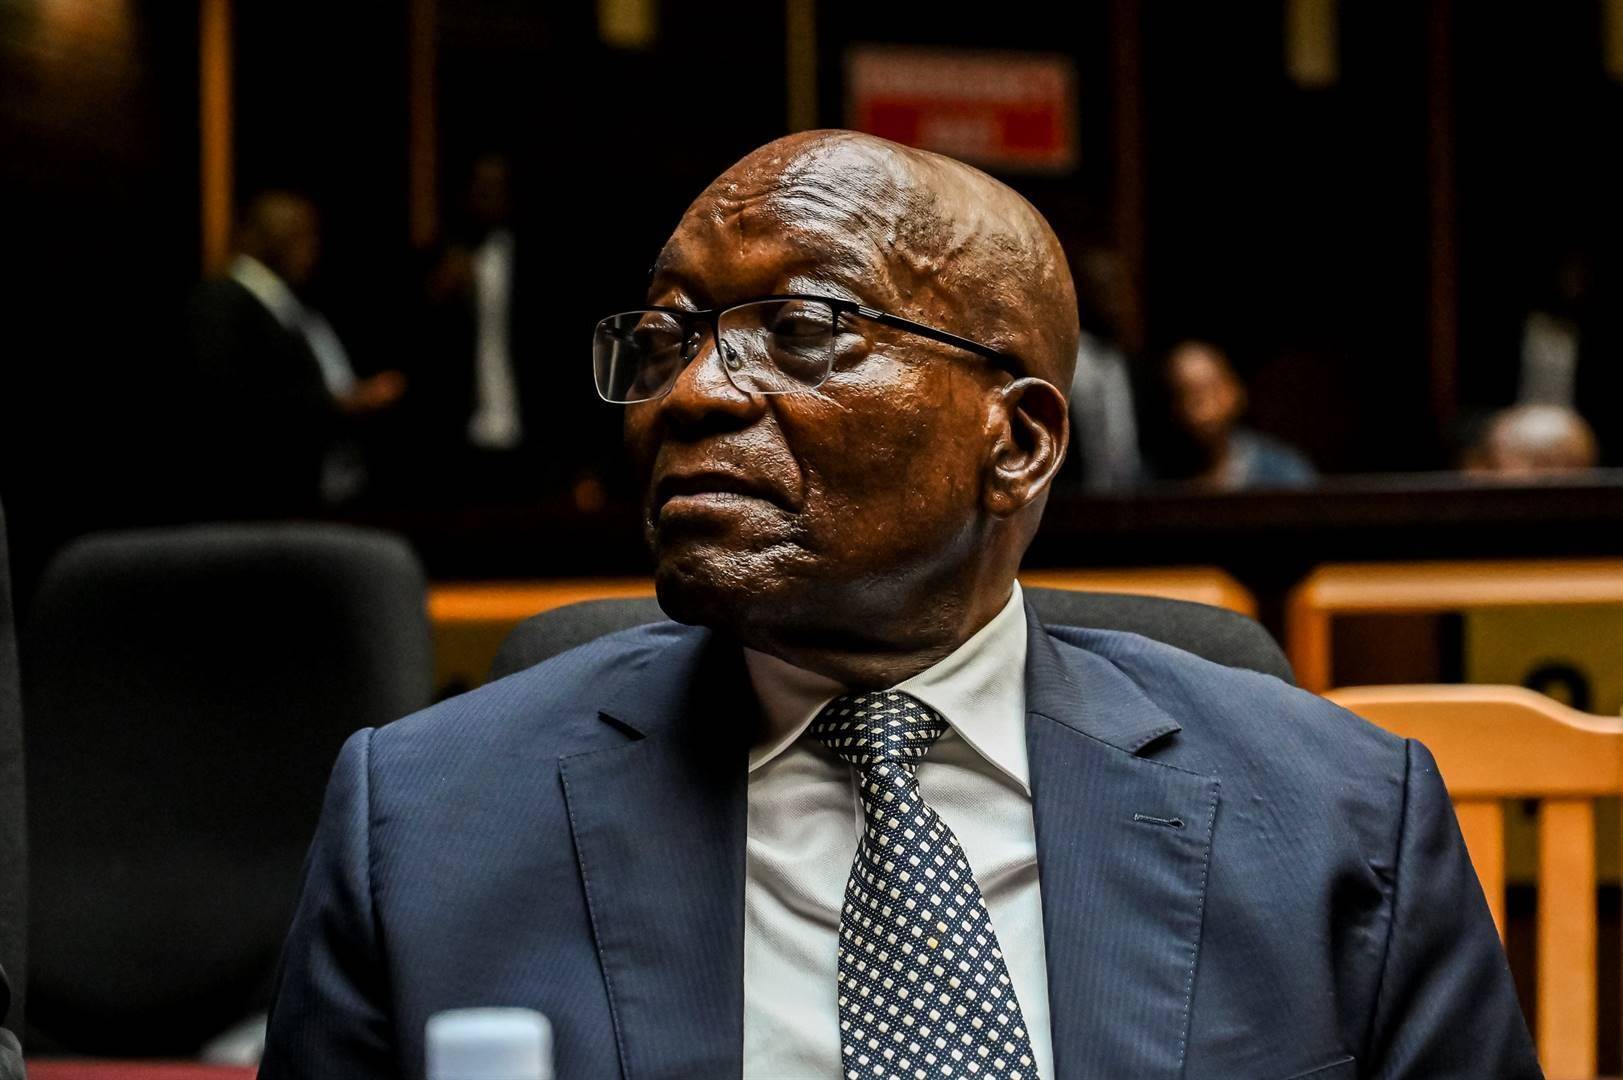 The National Joint Operation and Intelligence Structure says it's ready for any eventuality ahead of a decision on former president Jacob Zuma's return to prison.